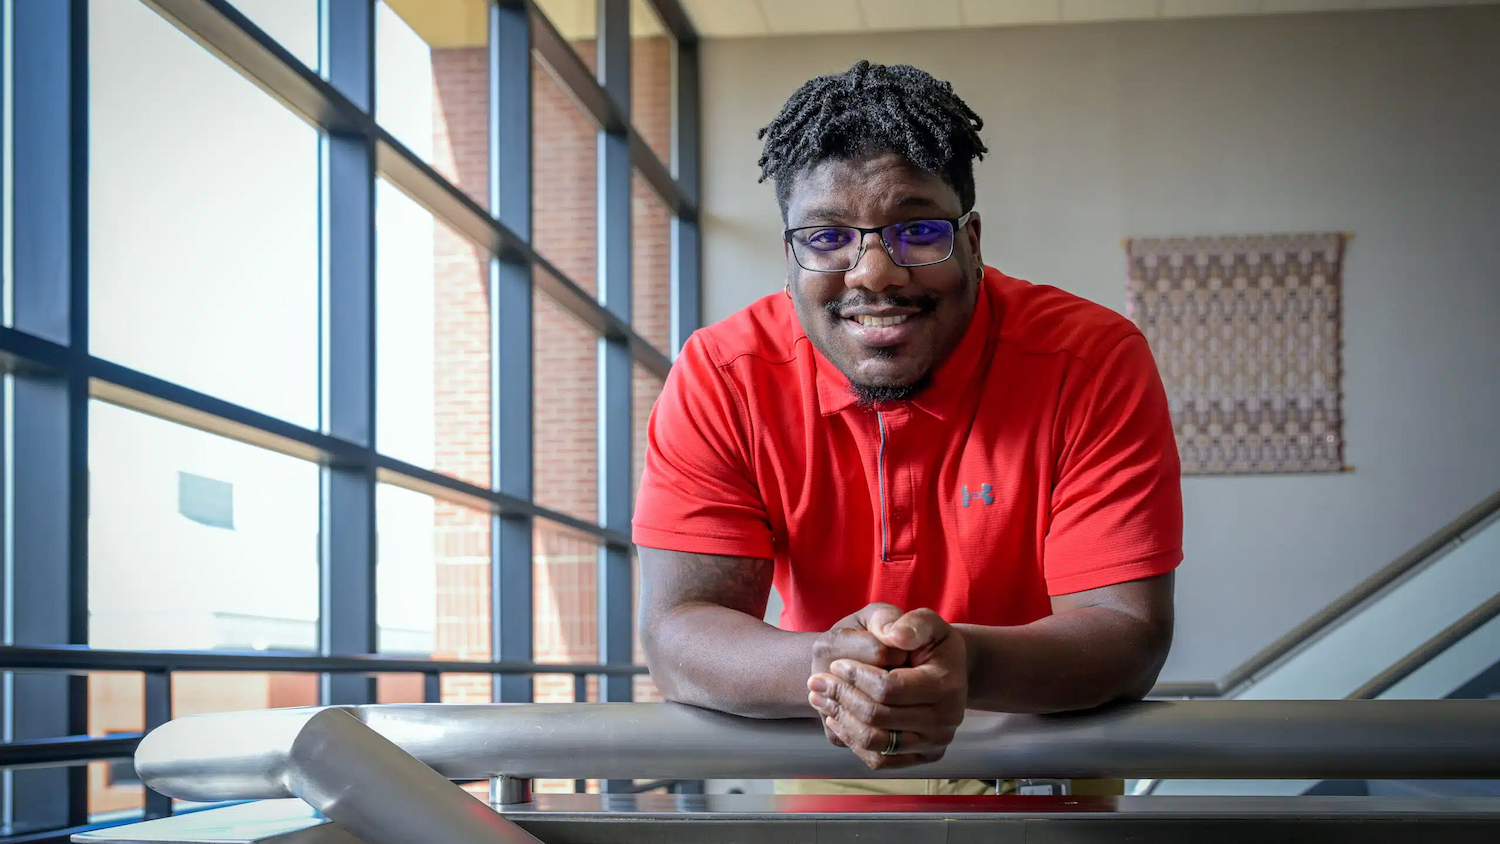 NC State staffer, Bredell Moody, smiles into the camera with his hands clasped together.